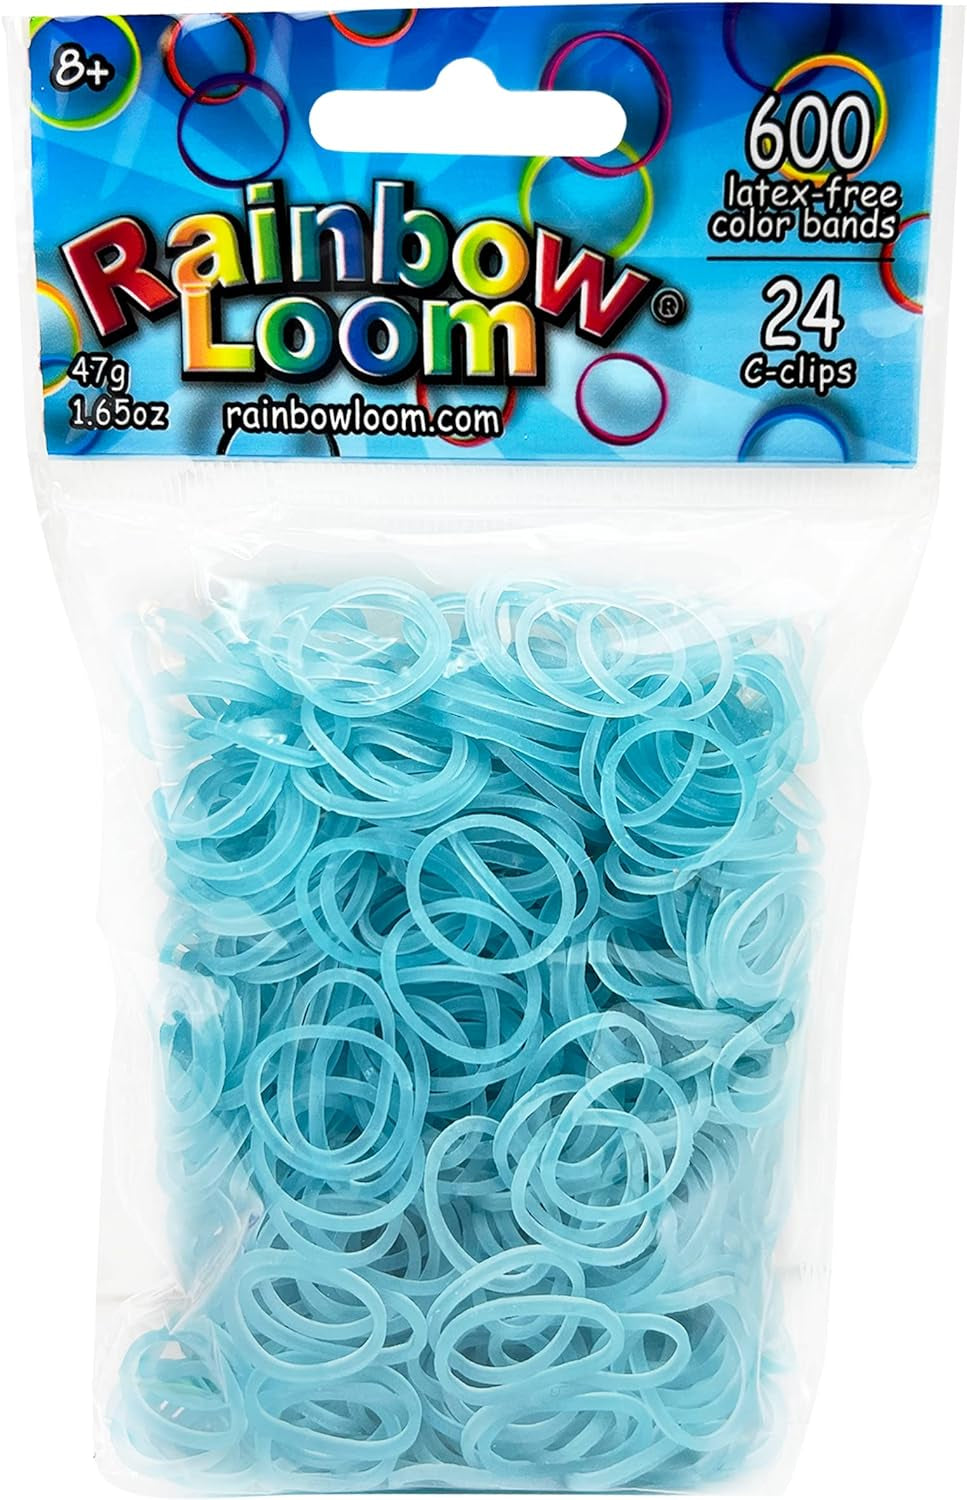 Glow Blue Rubber Bands with 24 C-Clips